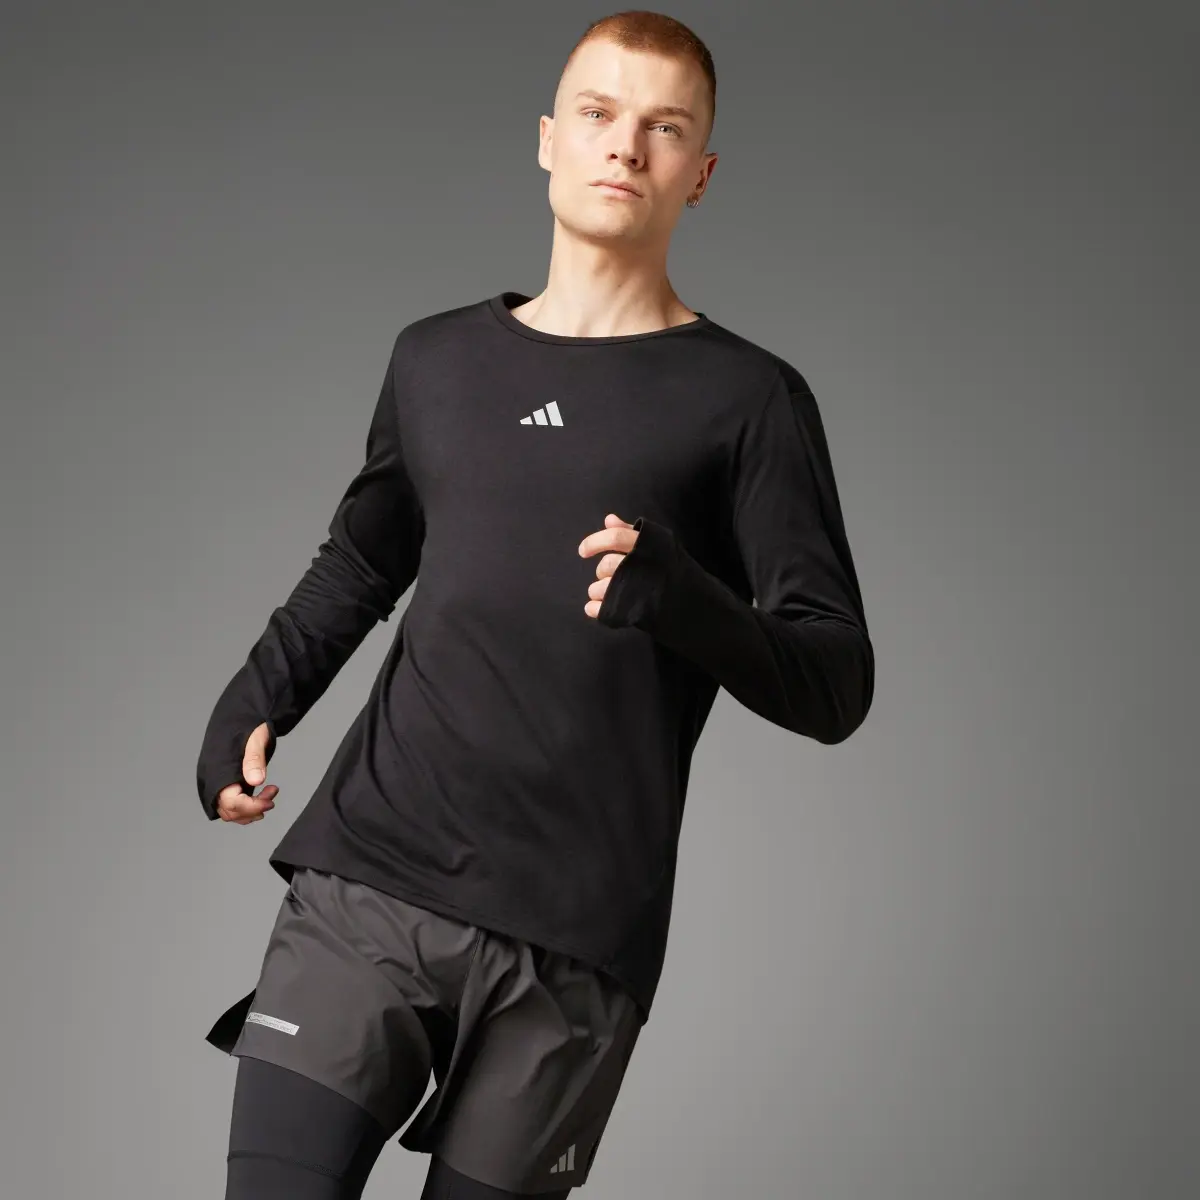 Adidas Ultimate Running Conquer the Elements Merino Long Sleeve Long-sleeve Top. 1